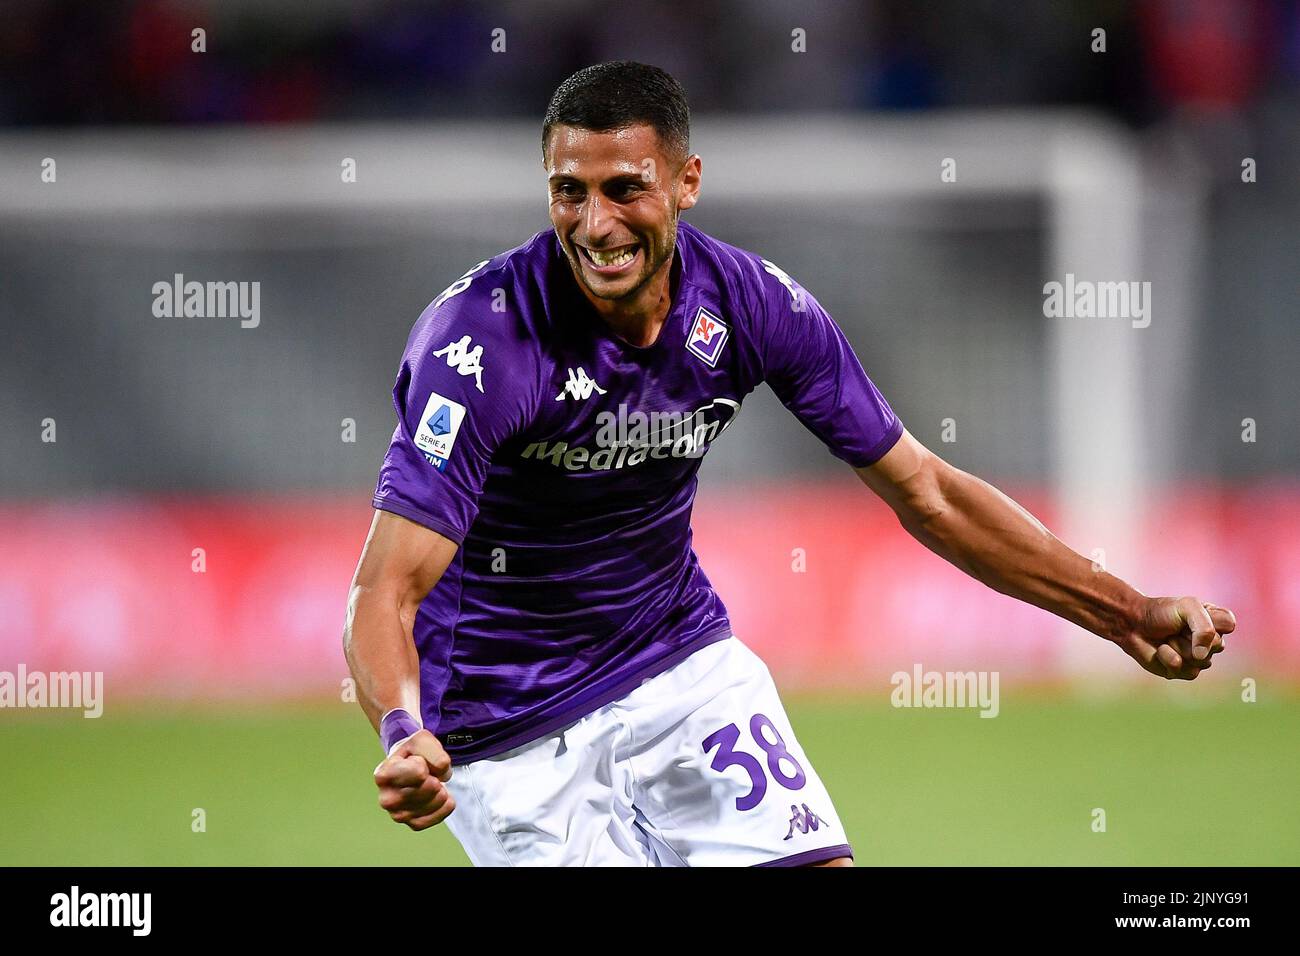 Florence, Italy. 14 August 2022. Rolando Mandragora of ACF Fiorentina  celebrates after scoring a goal during the Serie A football match between  ACF Fiorentina and US Cremonese. Credit: Nicolò Campo/Alamy Live News